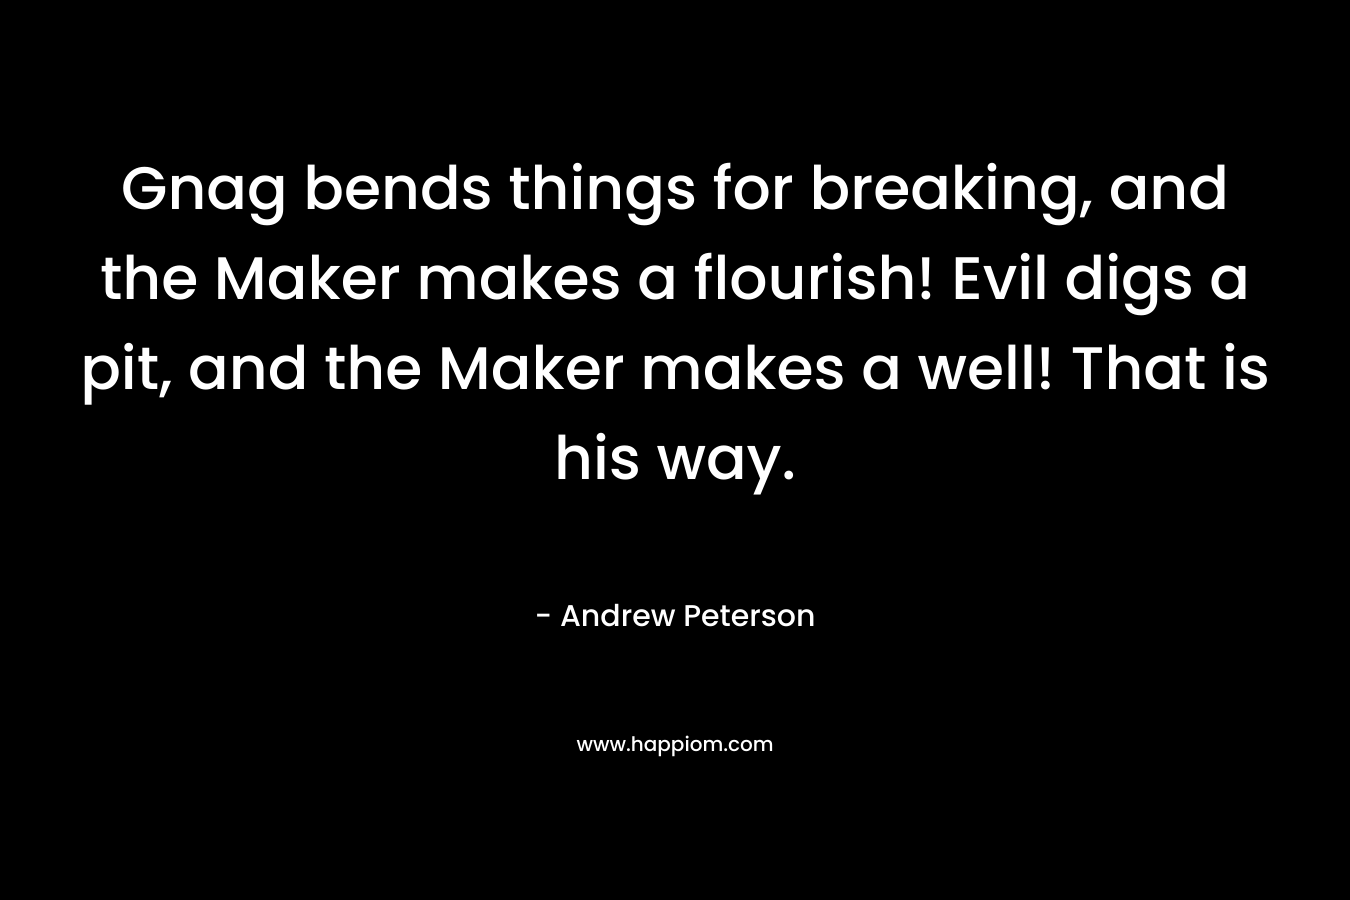 Gnag bends things for breaking, and the Maker makes a flourish! Evil digs a pit, and the Maker makes a well! That is his way. – Andrew Peterson